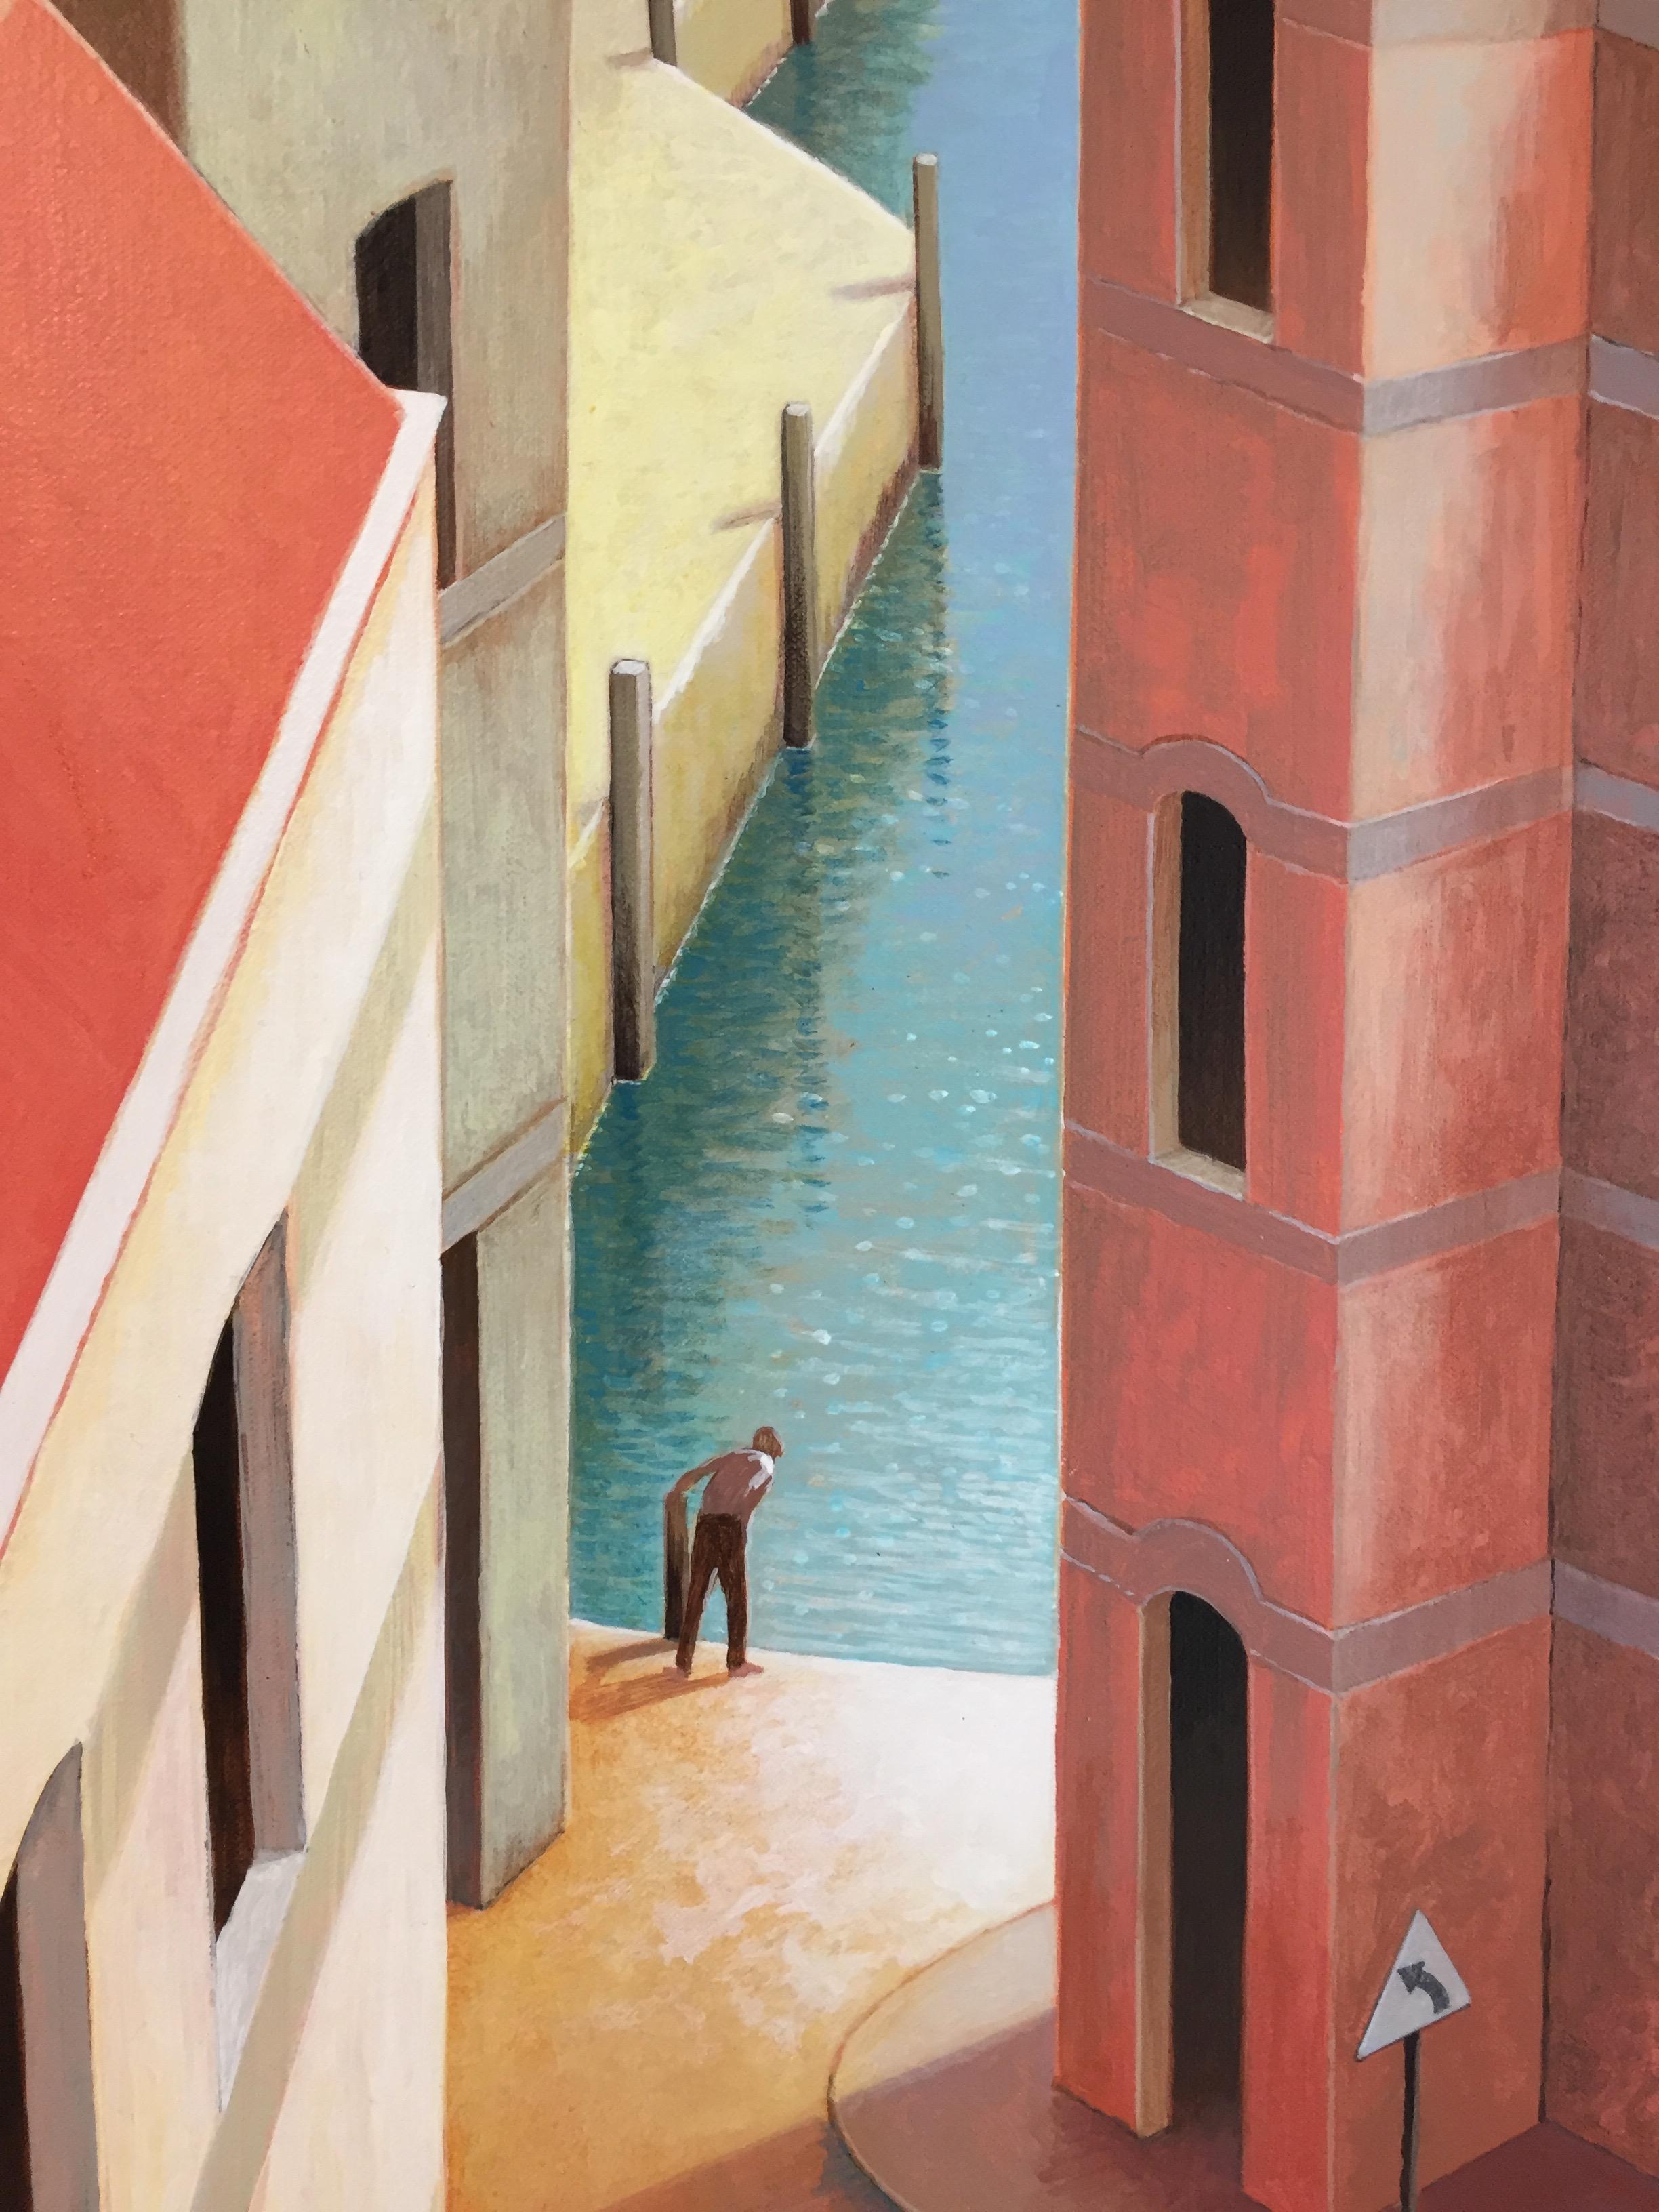 A warm afternoon- 21st Century, contemporary painting of a Mediterranean Port  - Painting by Michiel Schrijver